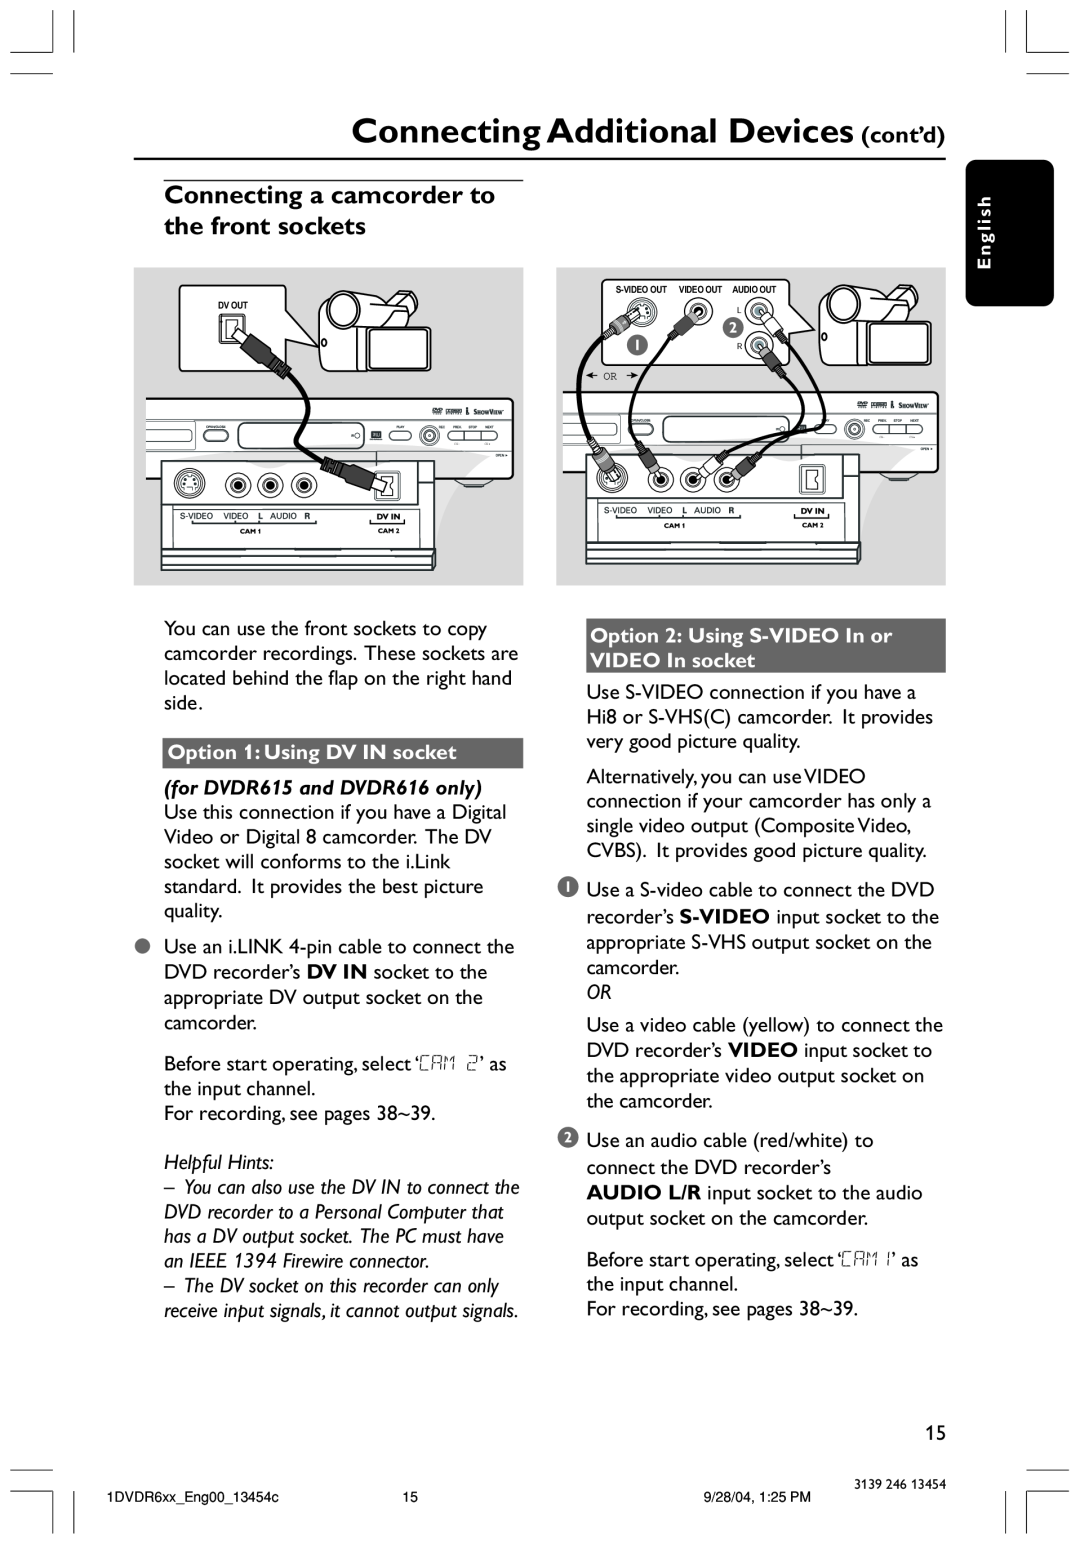 Philips DVDR612/97 user manual Connecting Additional Devices cont’d, Connecting a camcorder to the front sockets 